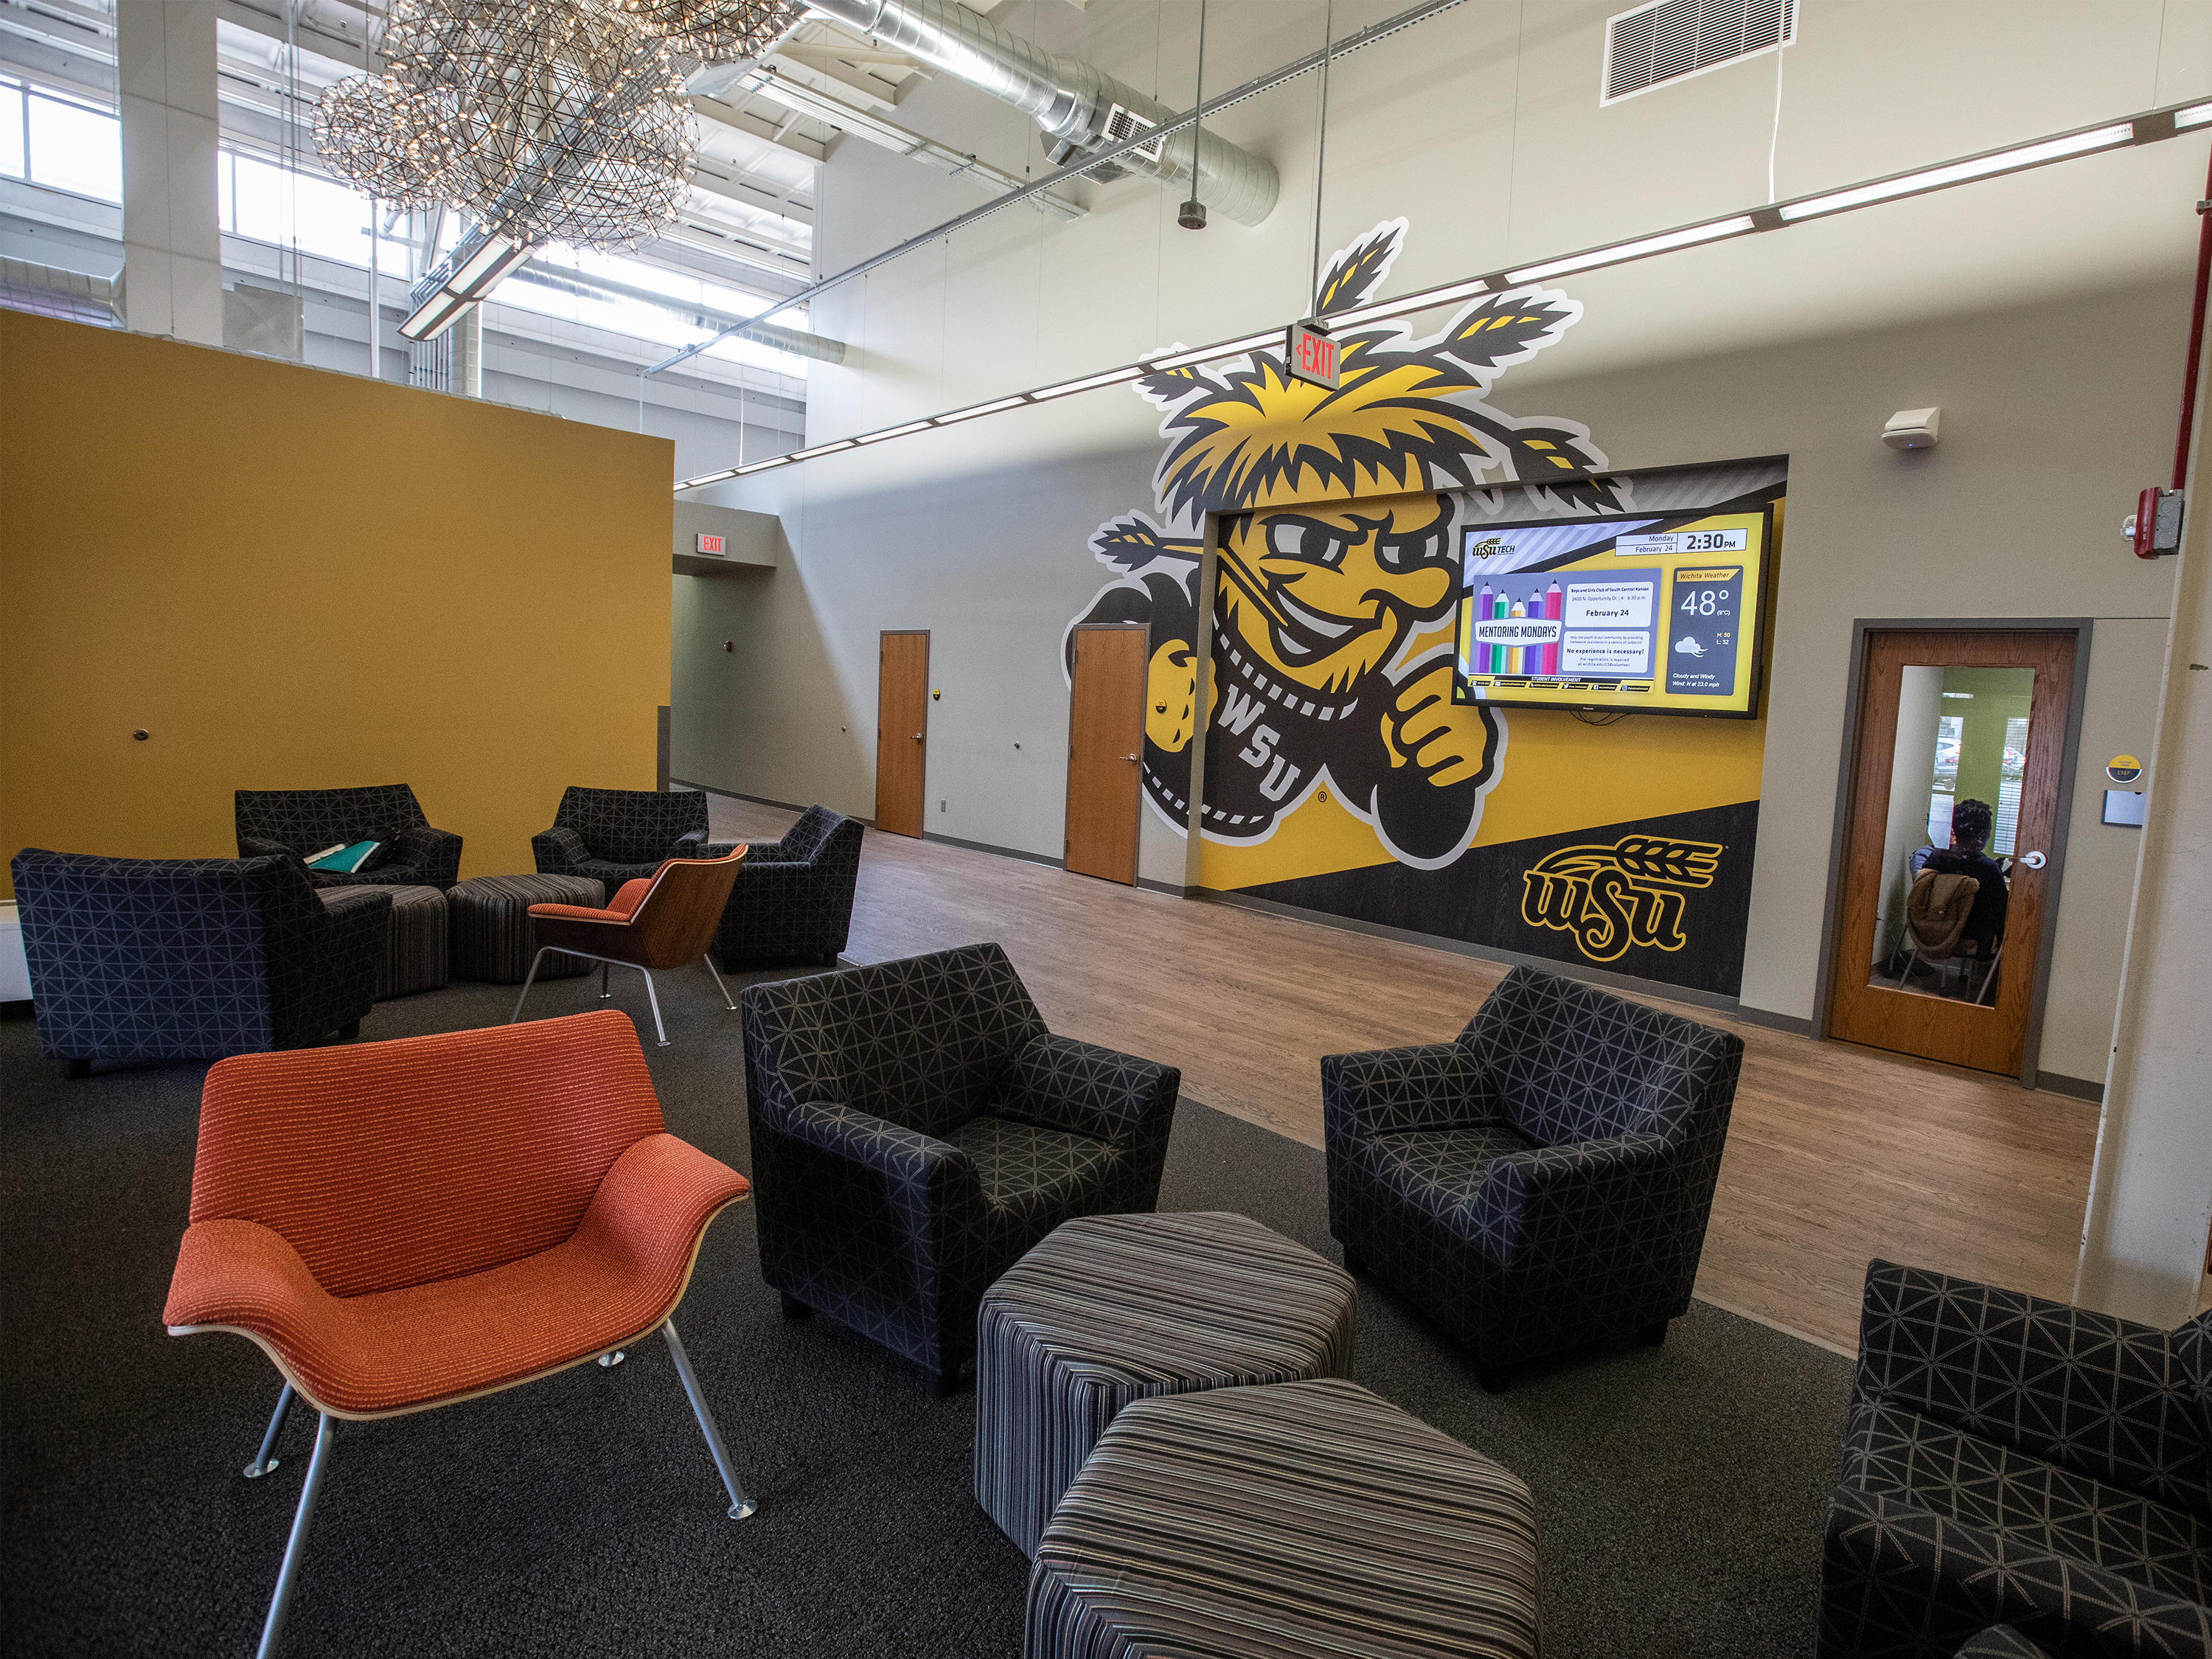 Physical Therapy entry lounge area in the WSU OldTown building.